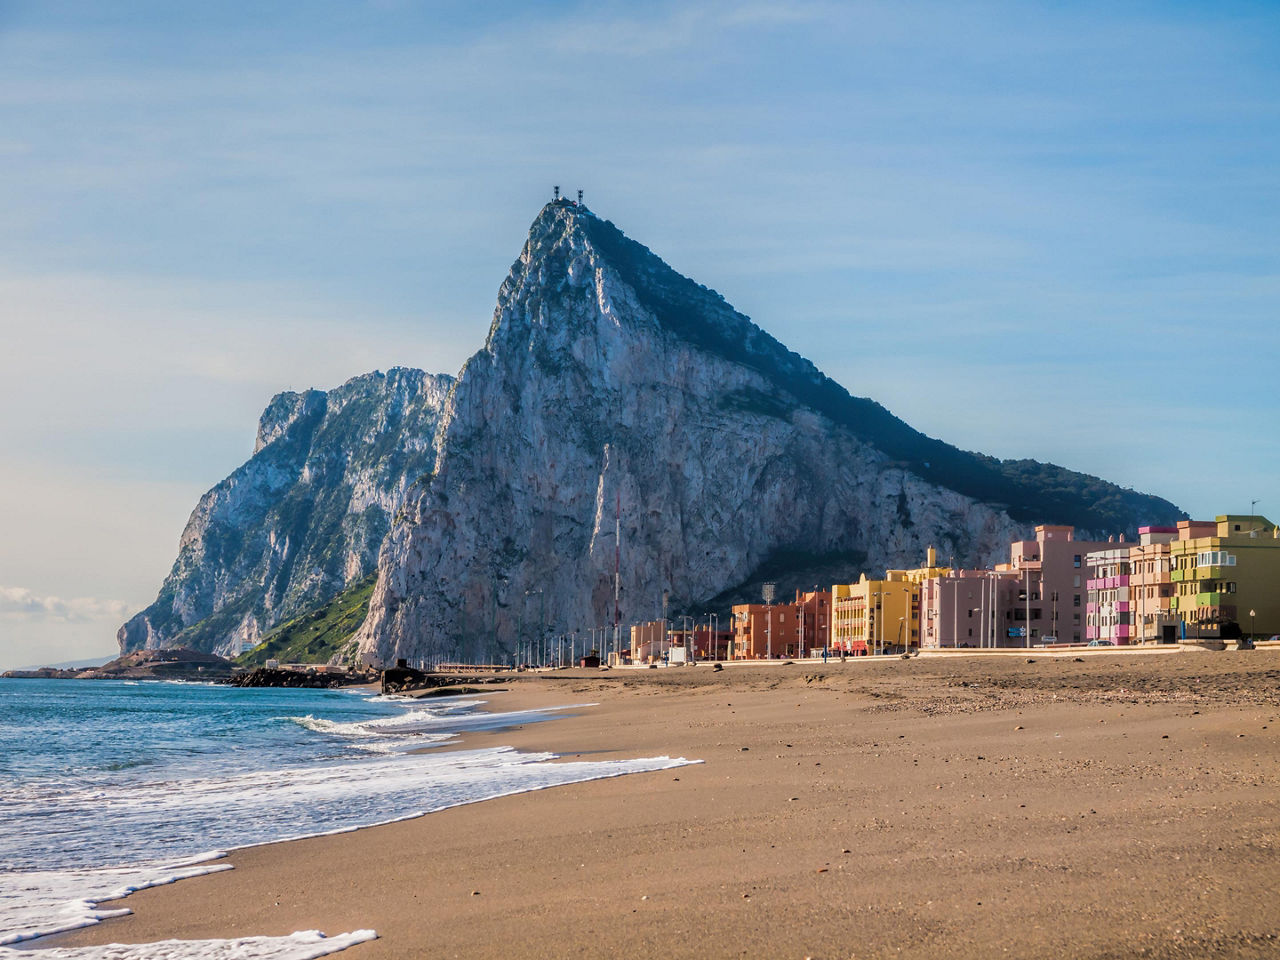 View of the Rock of Gibraltar from a beach